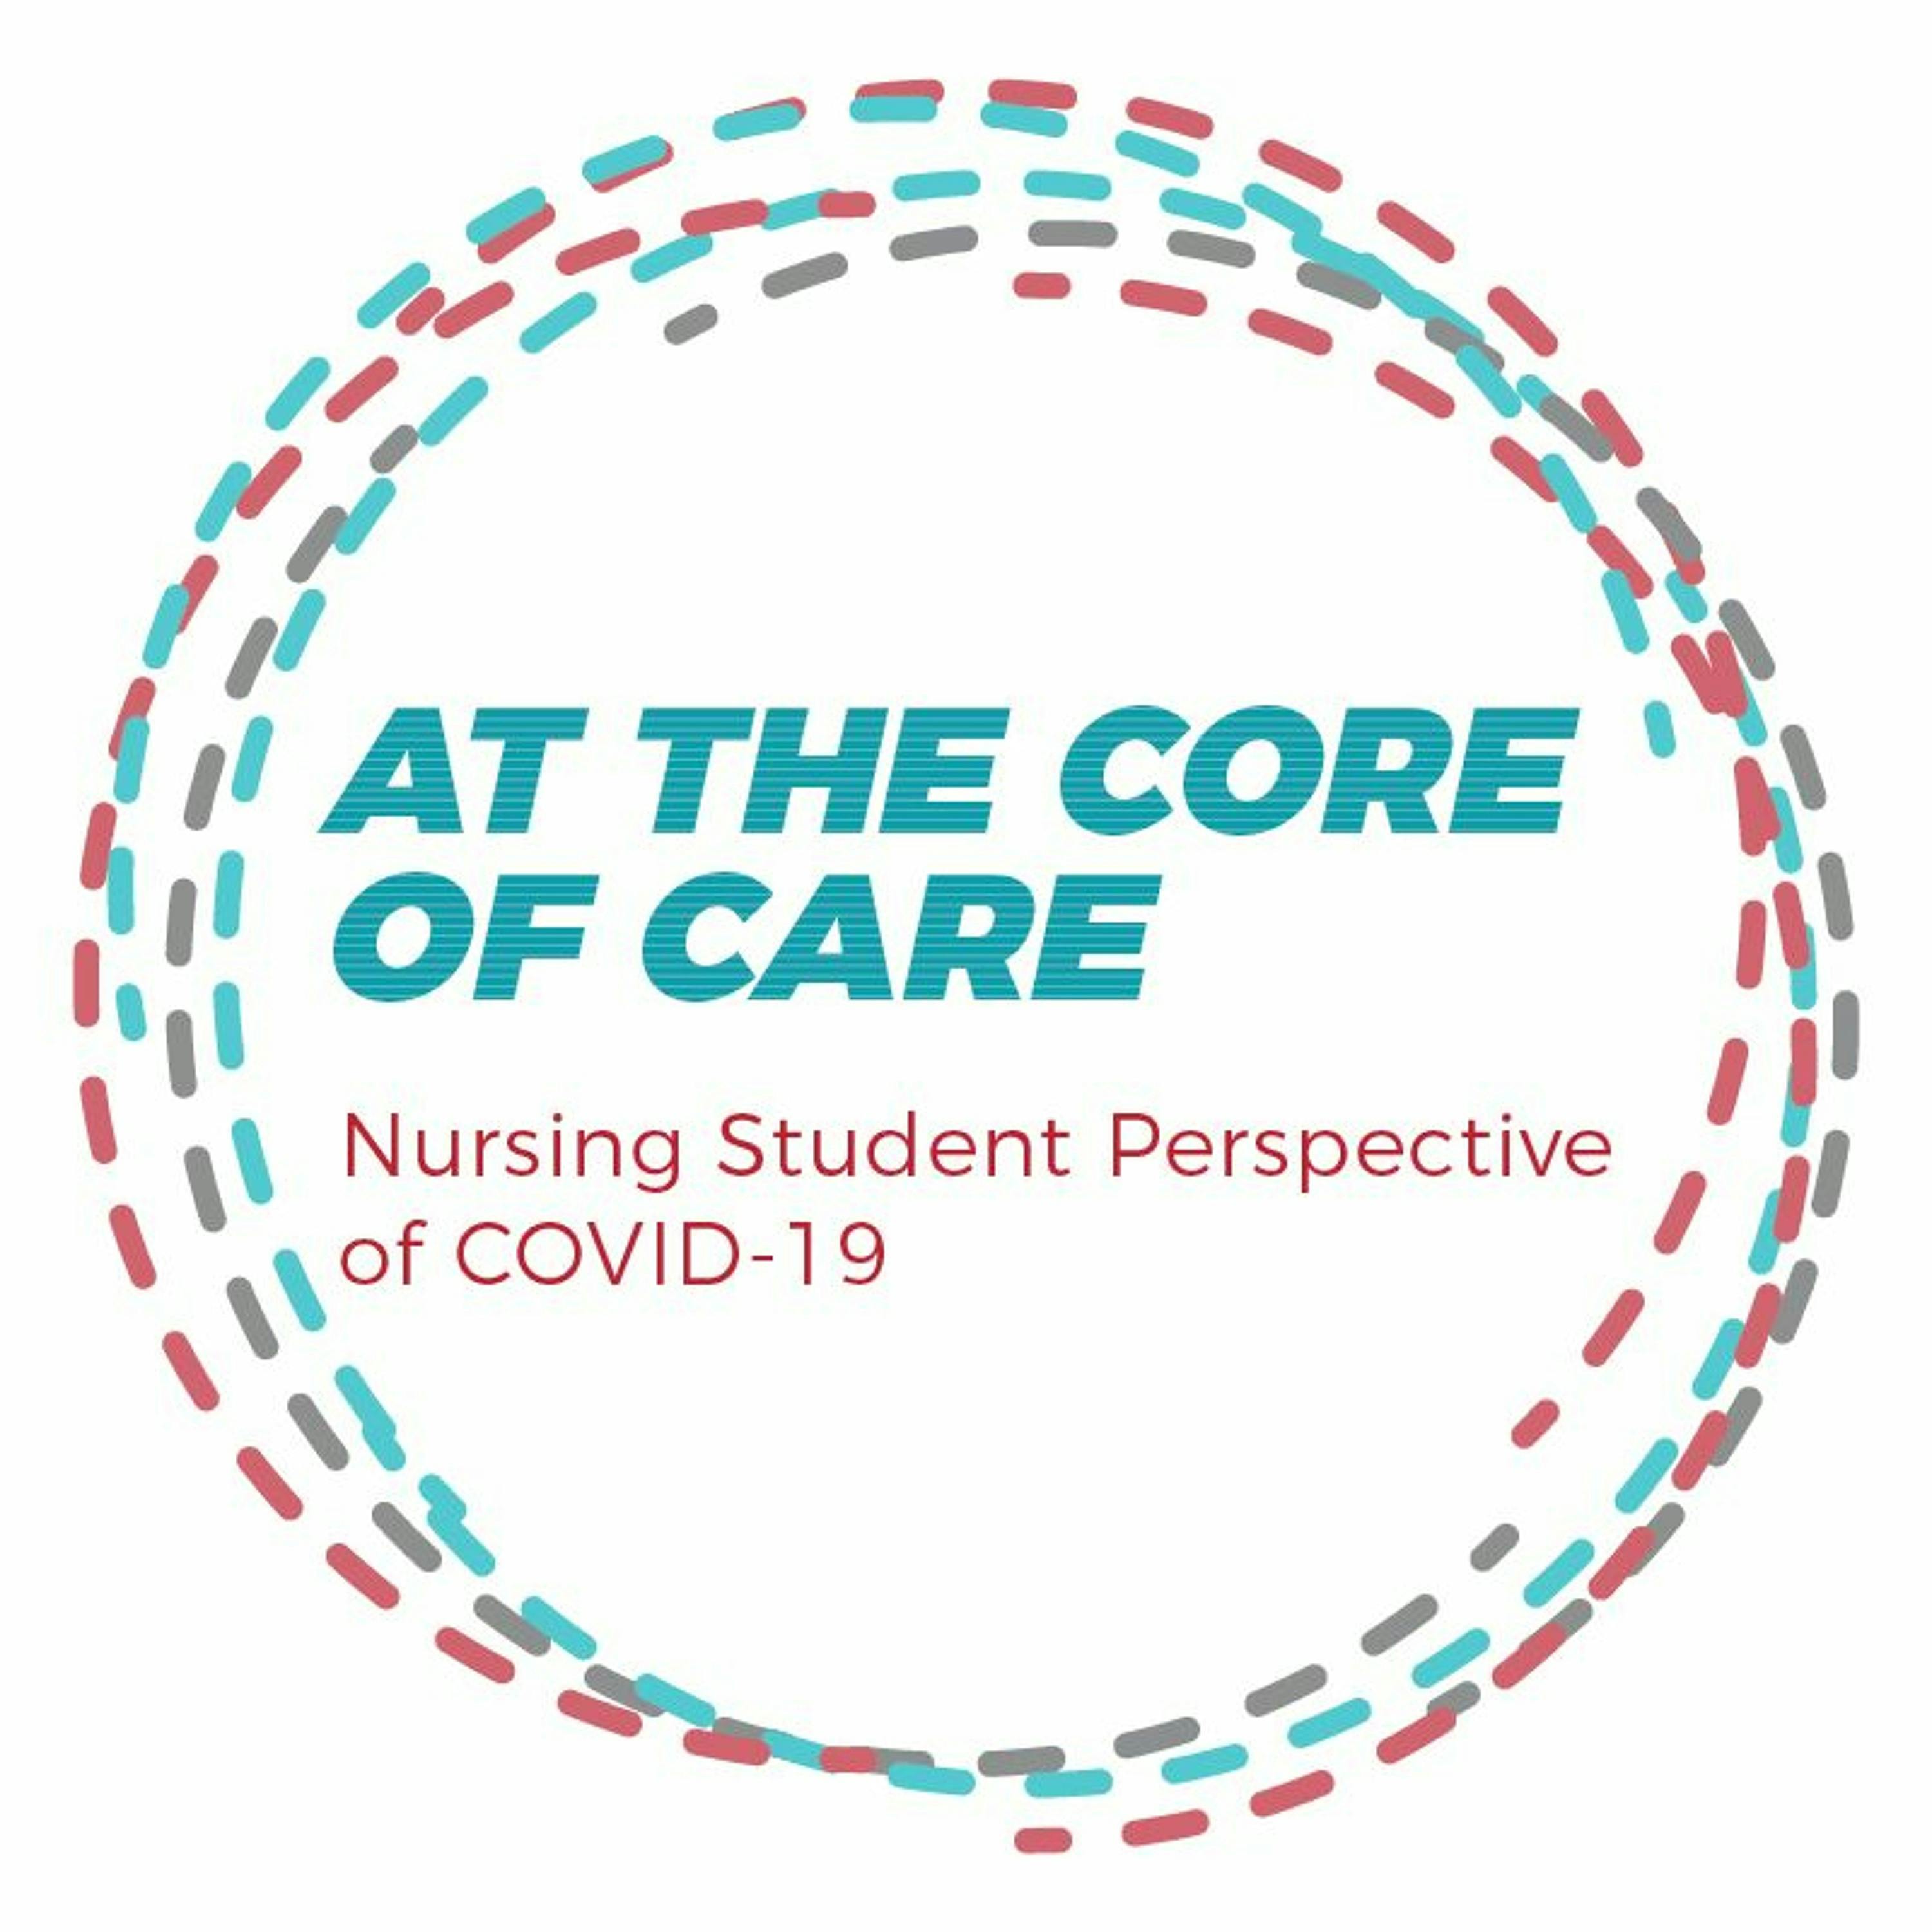 Nursing Student Perspective of COVID-19